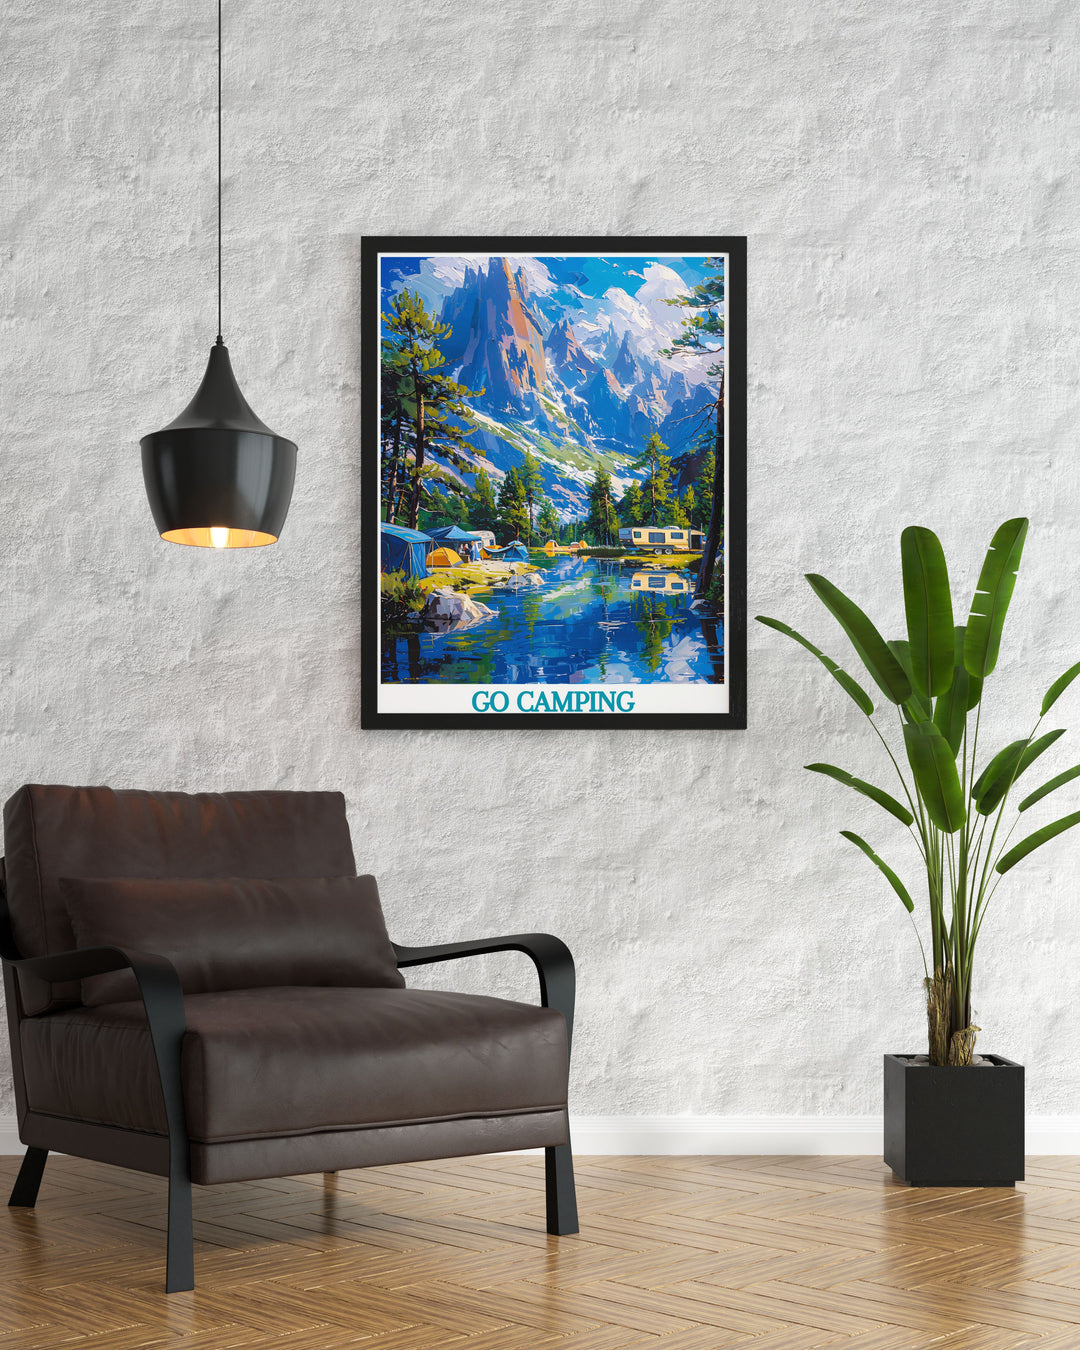 Canvas print of a vintage camper van by a mountain, capturing the beauty and simplicity of camping by the peaks, ideal for adding a touch of nature and adventure to your living space.